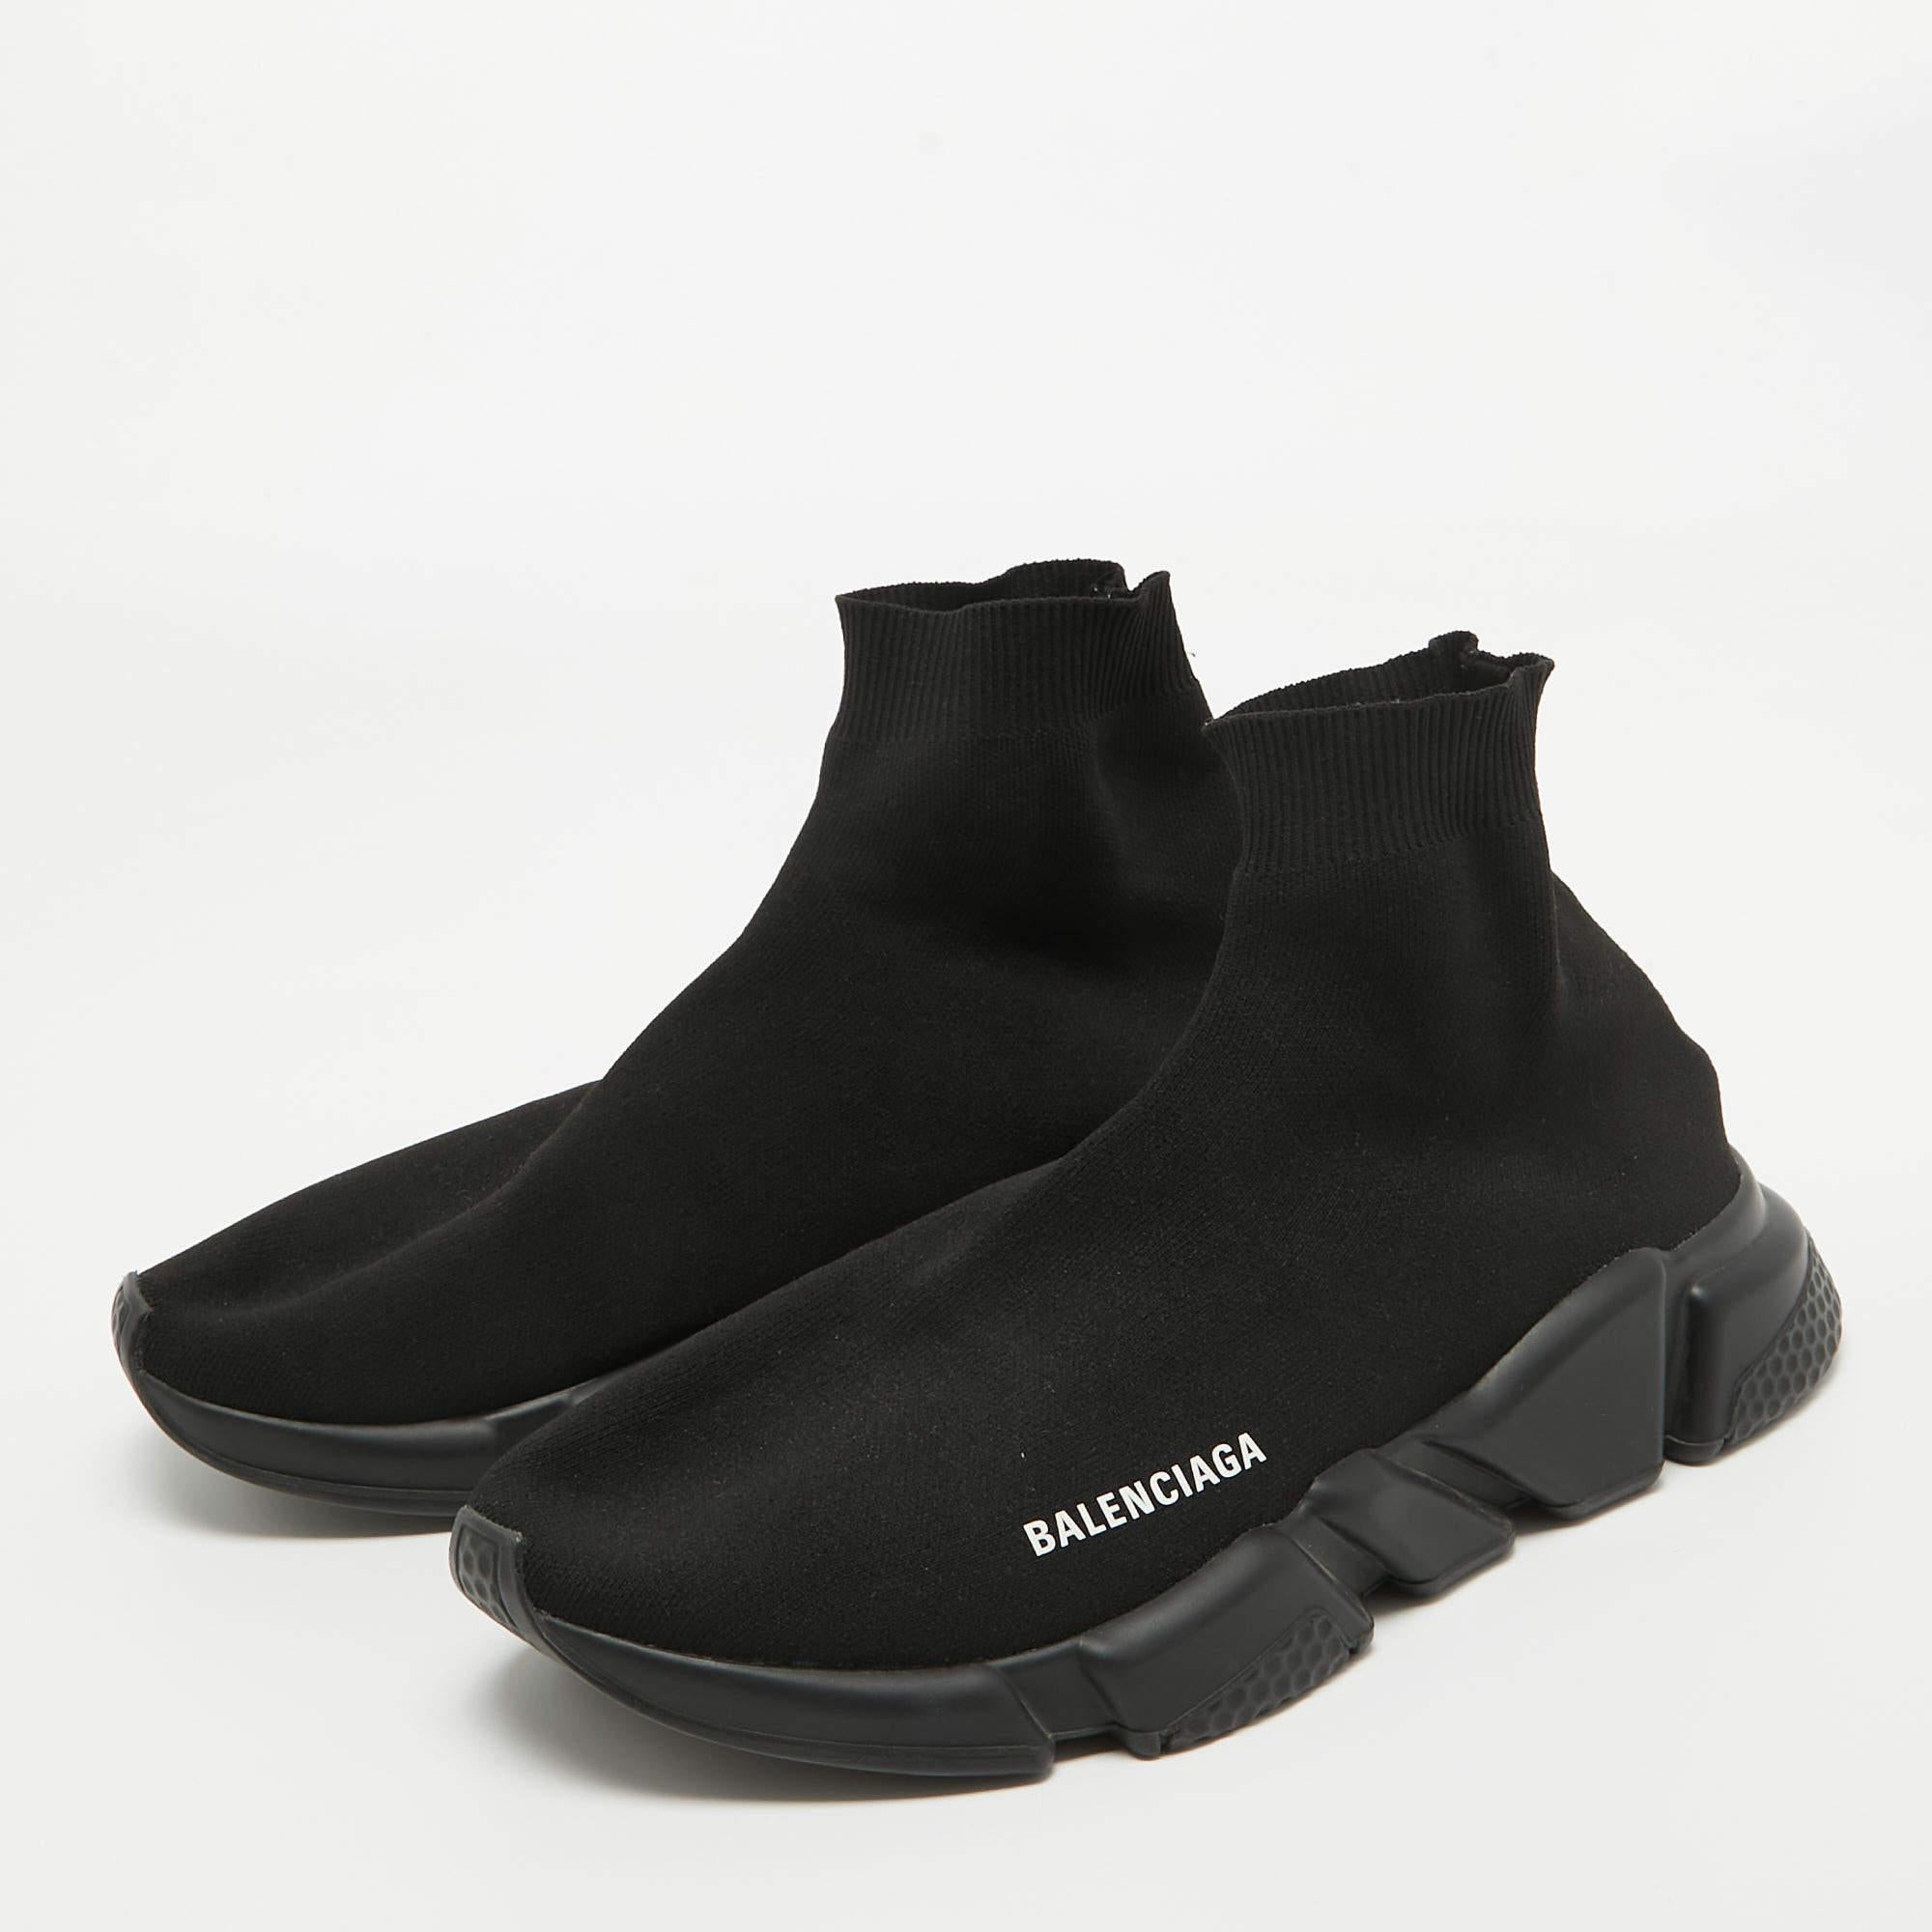 Balenciaga Black Knit Fabric Speed Trainer Sneakers Size 43 4